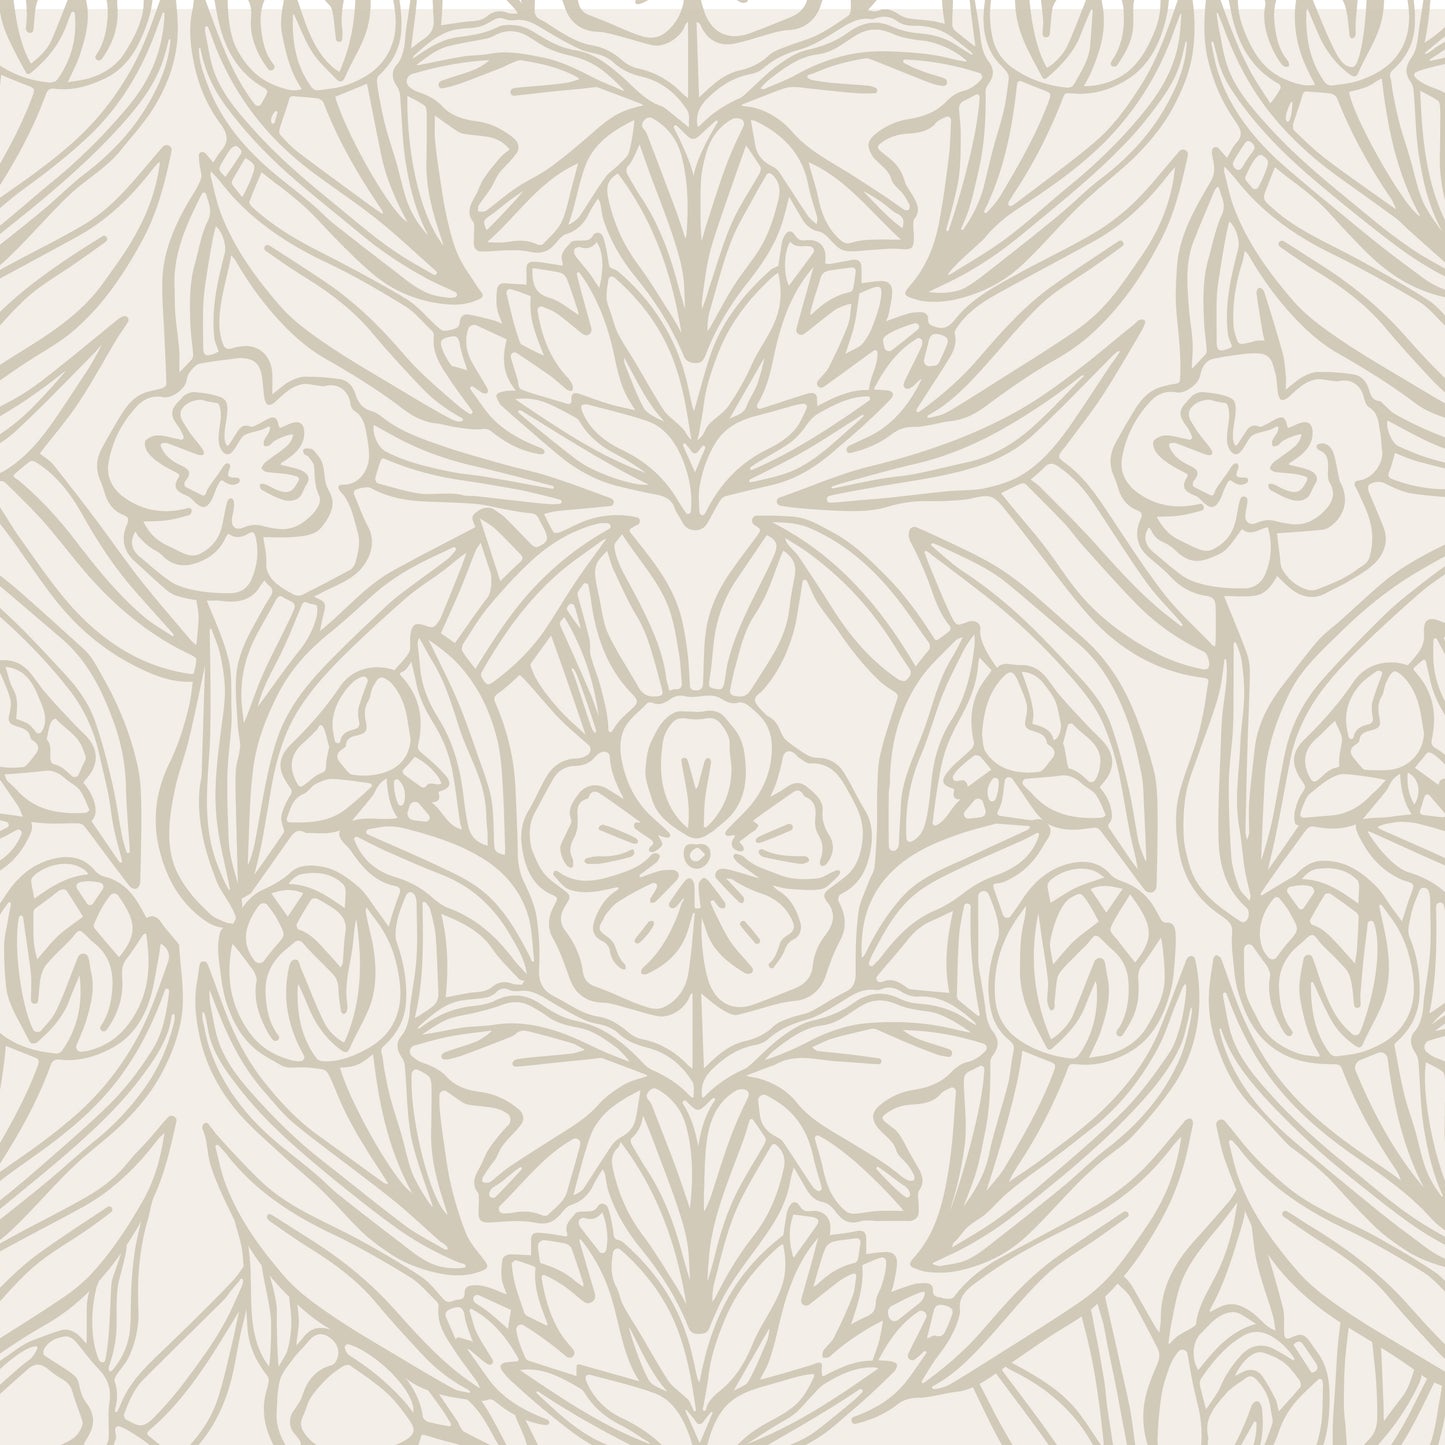 Featuring a subtle combination of florals, this taupe wallpaper adds a touch of elegance shown zoomed in.